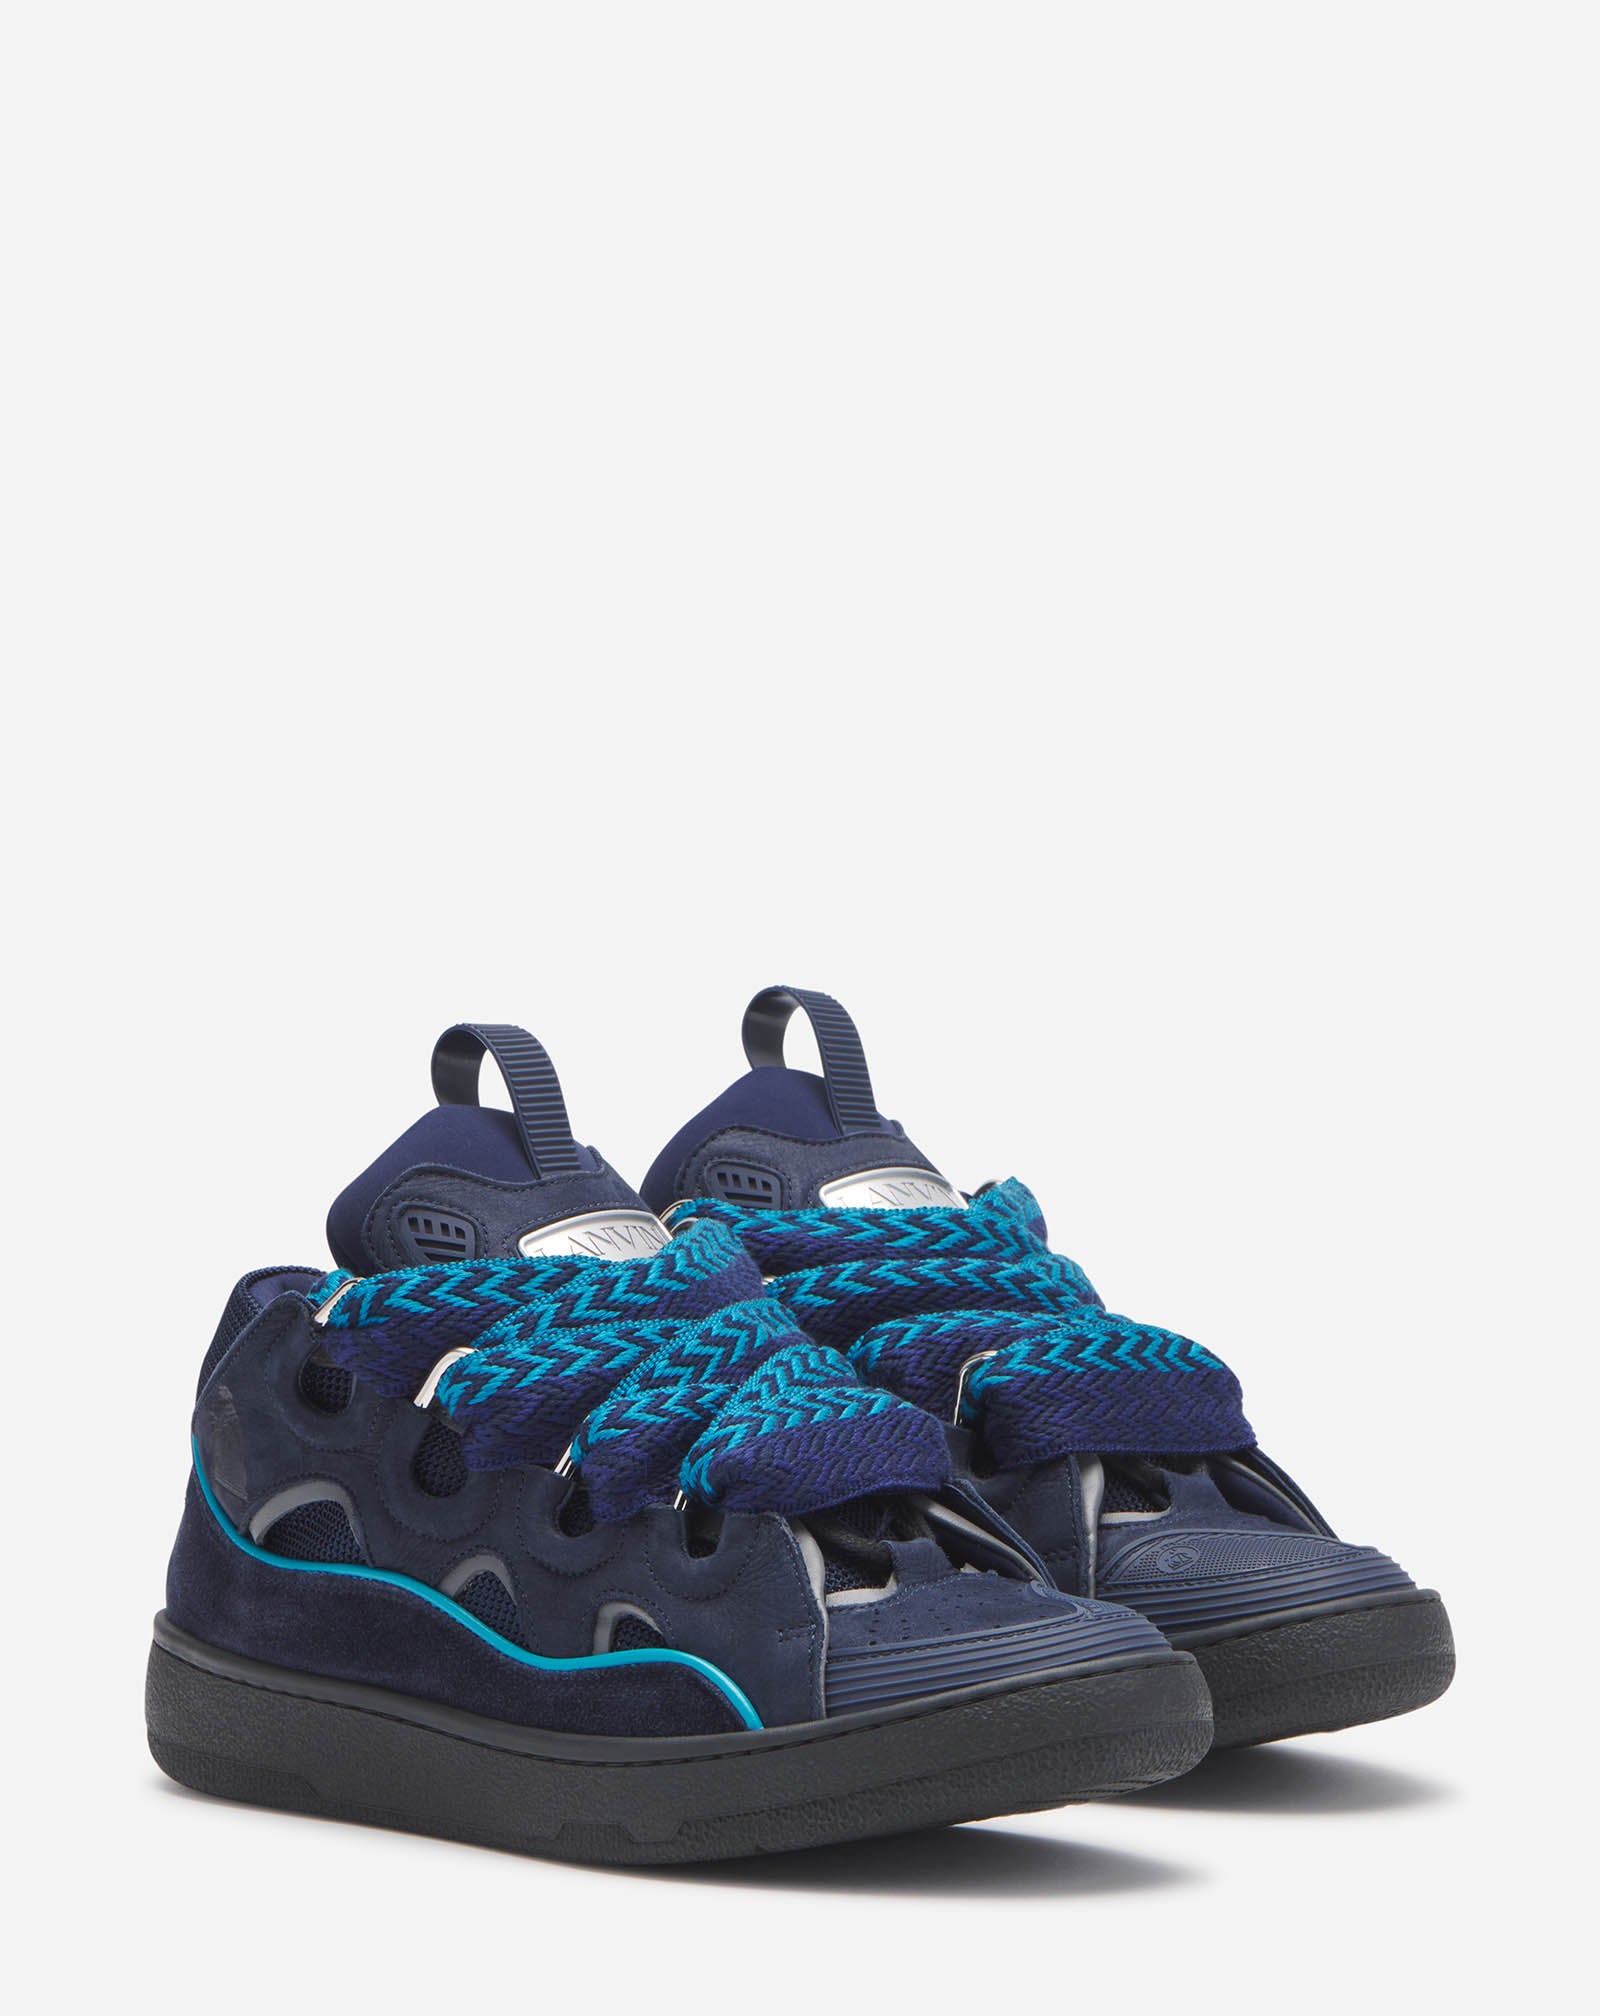 LEATHER CURB SNEAKERS NAVY BLUE/GRAY | Lanvin – LANVIN